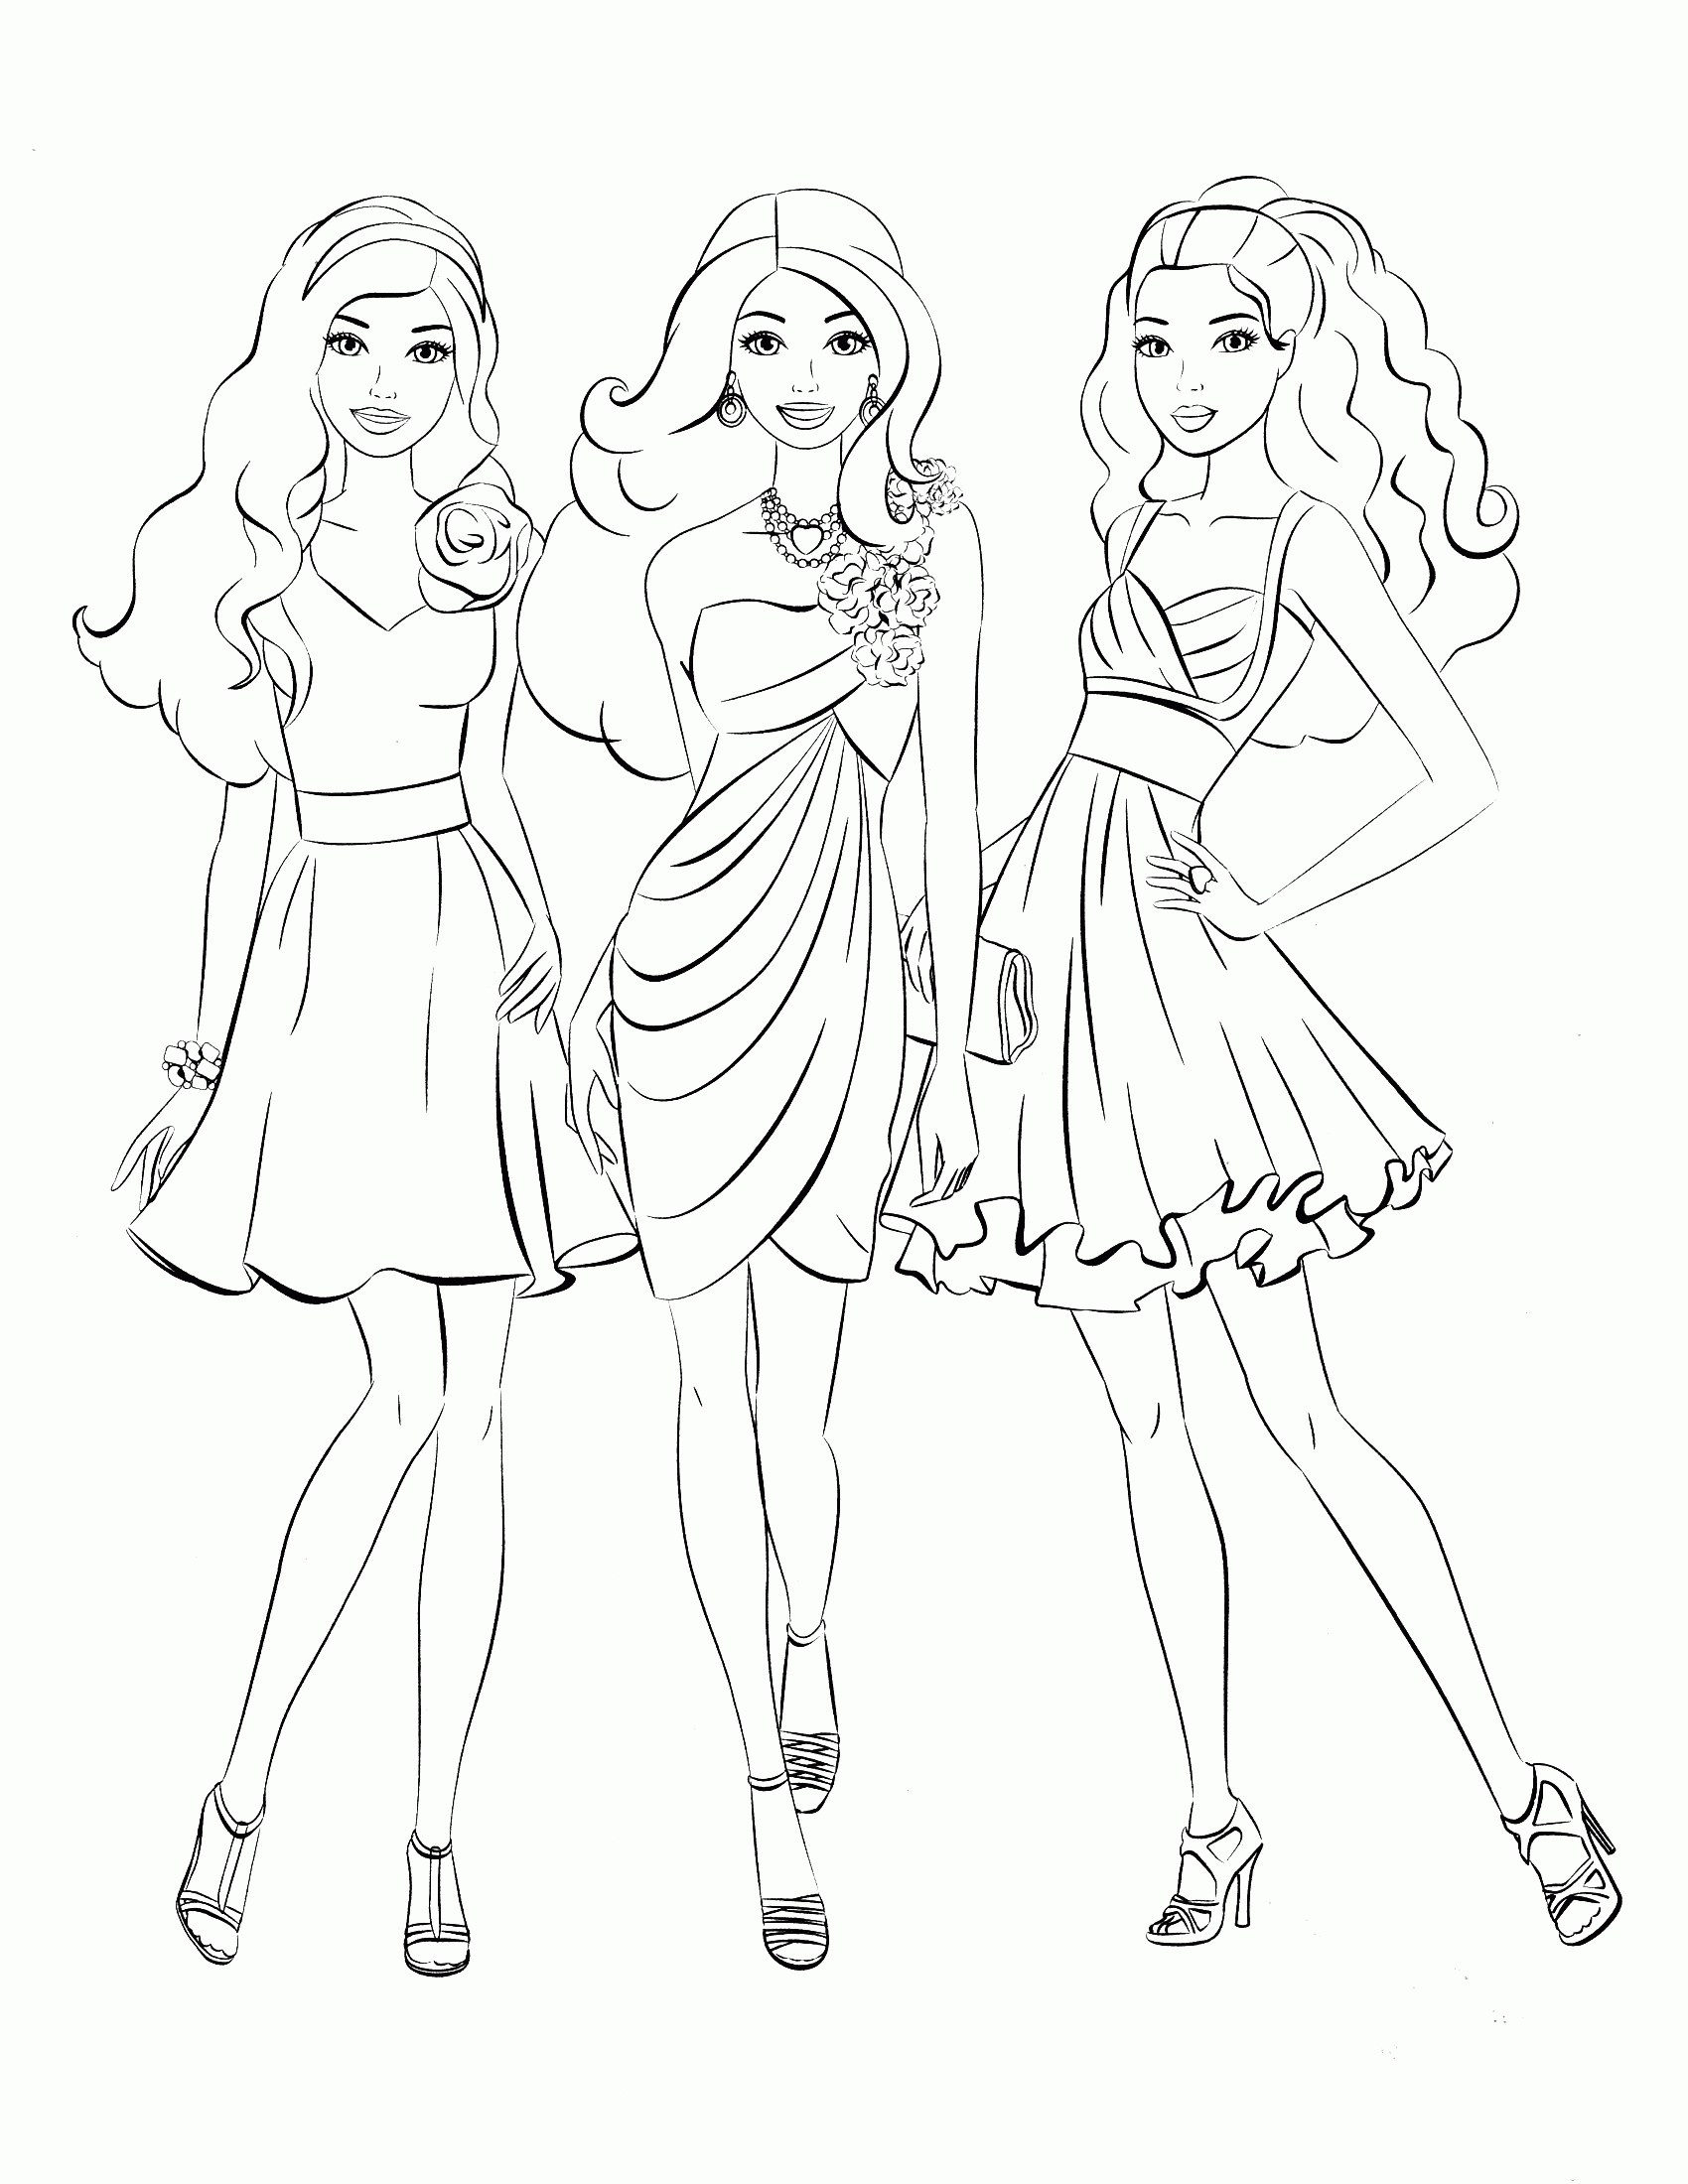 Barbie Coloring Pages Coloring Page Fashion Show Free Printable - Free Printable Barbie Coloring Pages